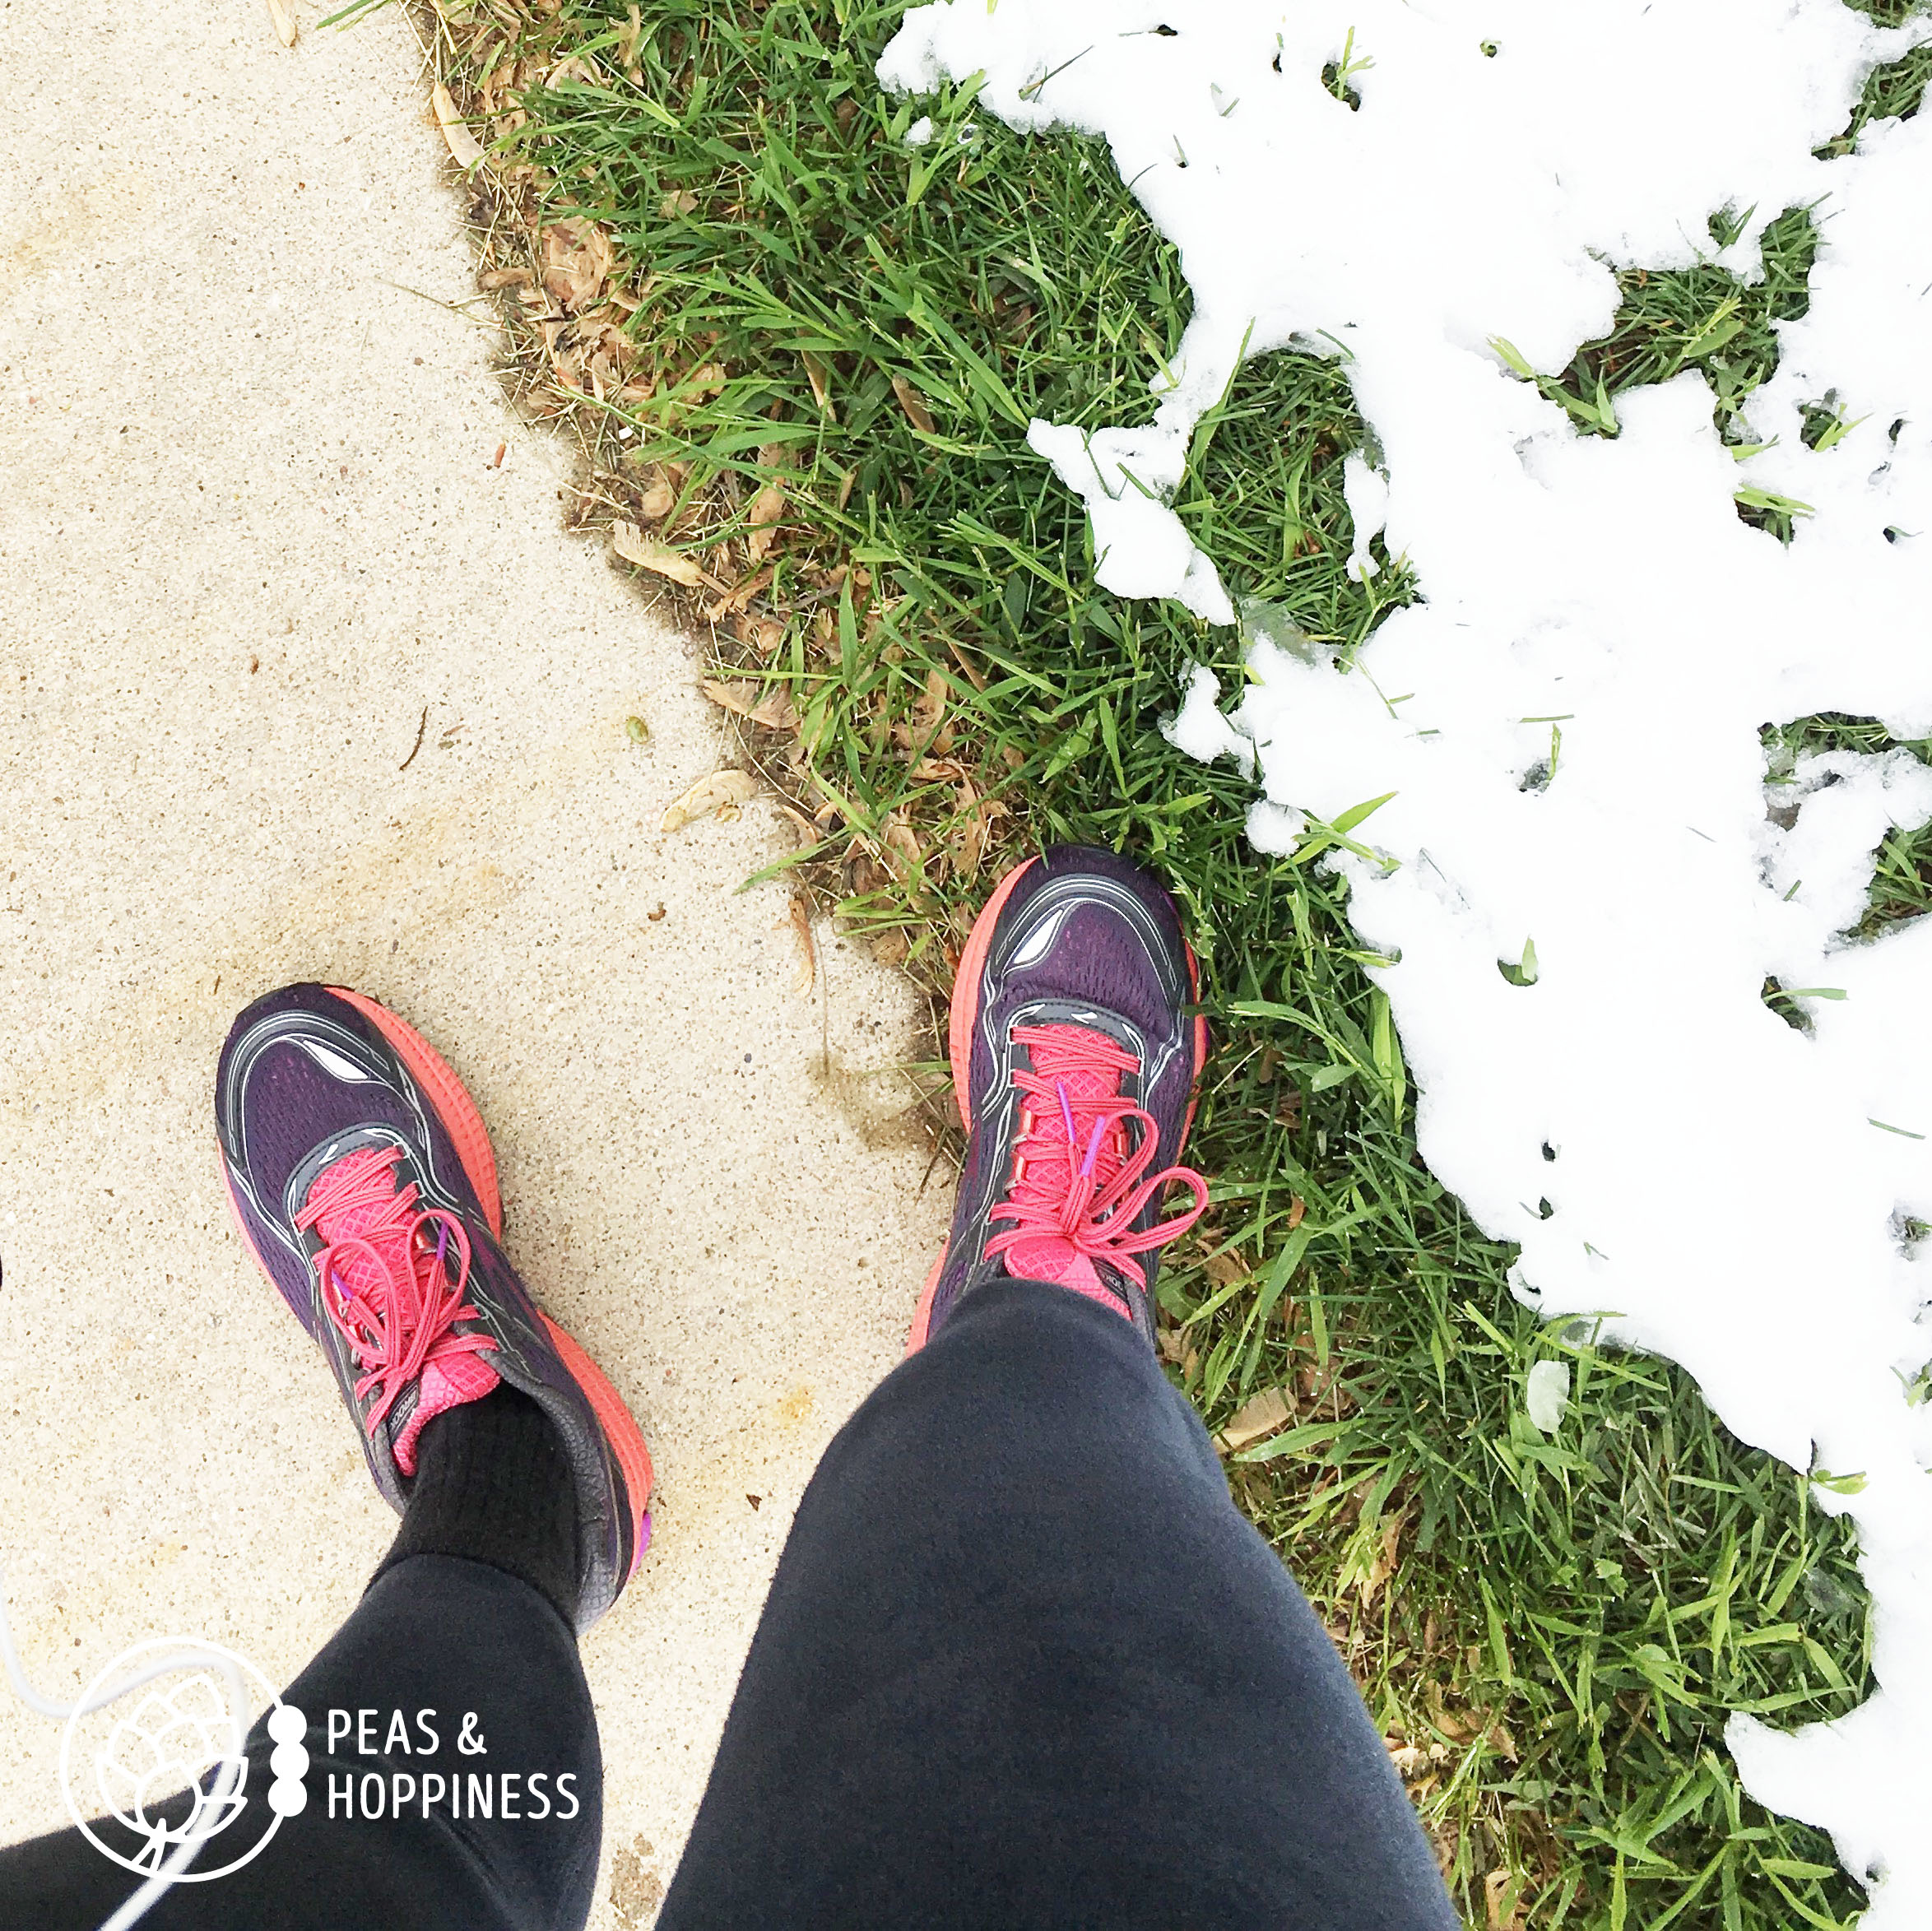 If I used snow as an excuse, I'd never go running...